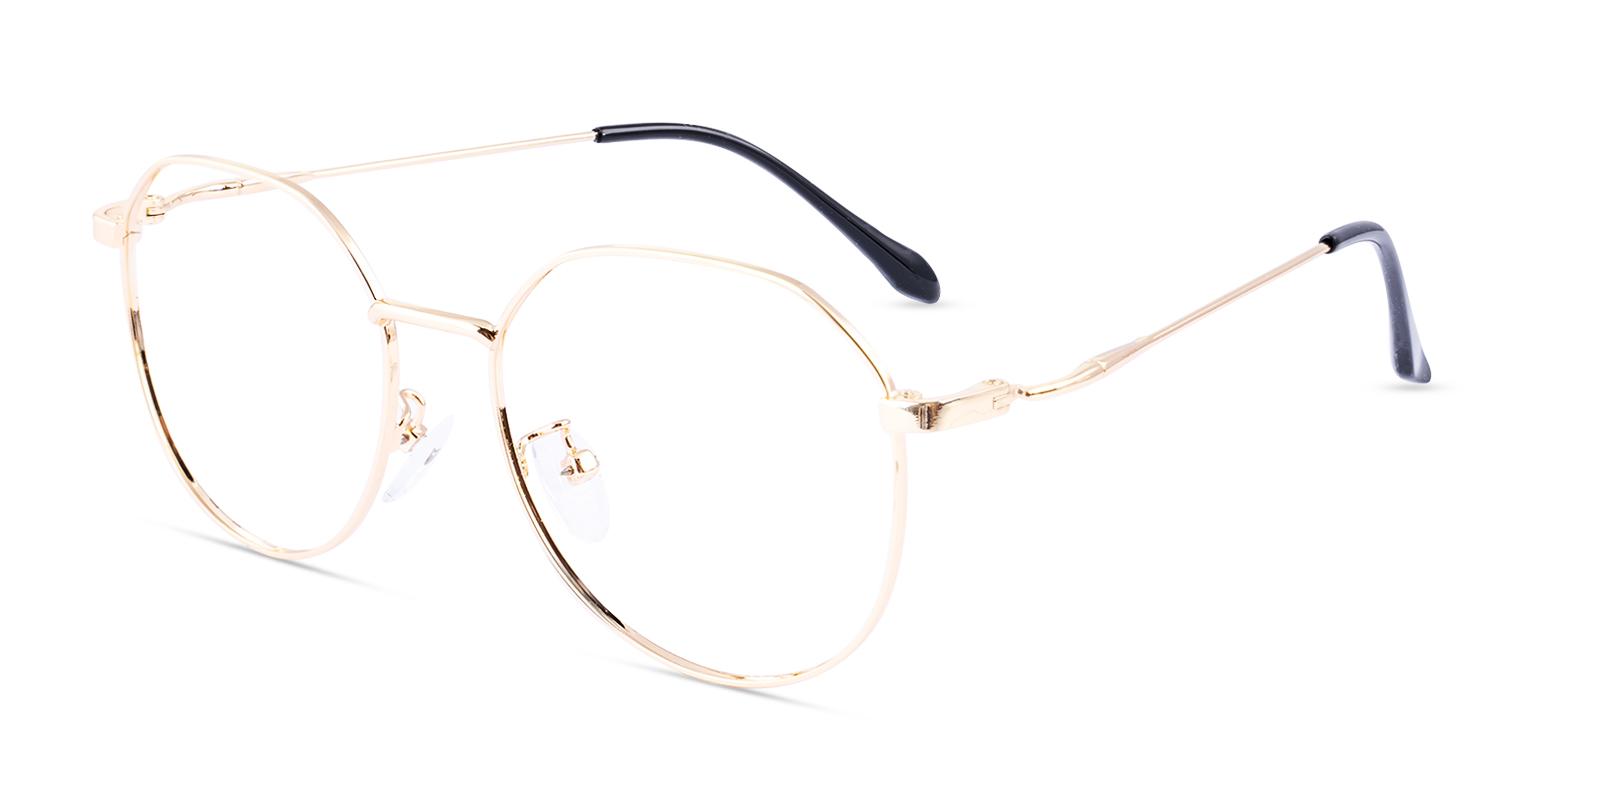 Lossious Gold Metal Eyeglasses , NosePads Frames from ABBE Glasses